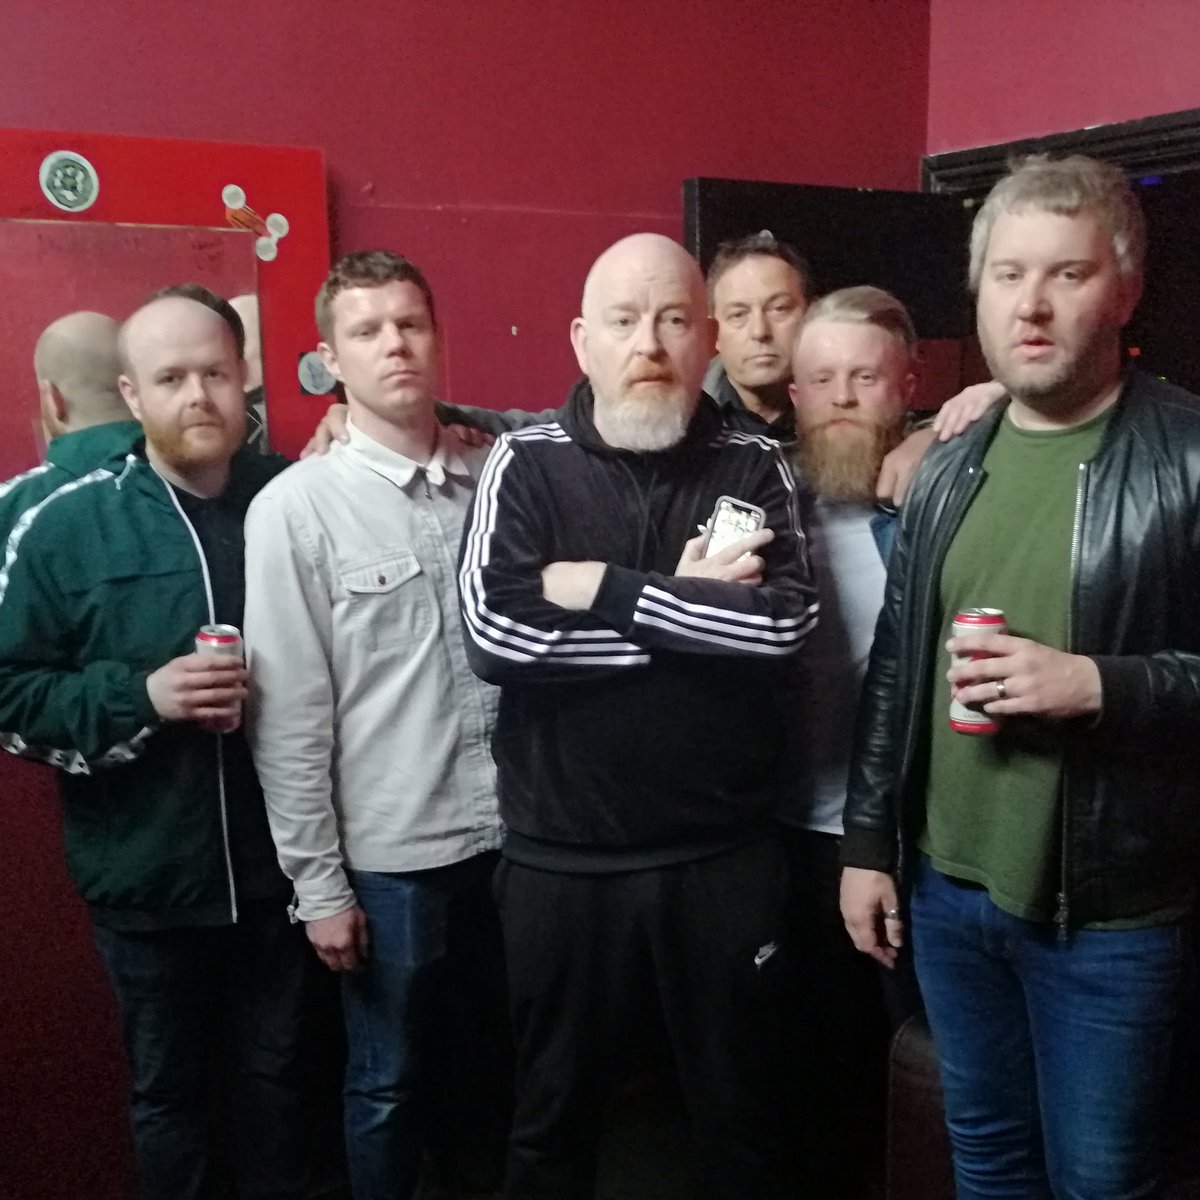 Last night with @TheJadeAssembly & @creation23label man Alan Mcgee at @undergroundsot